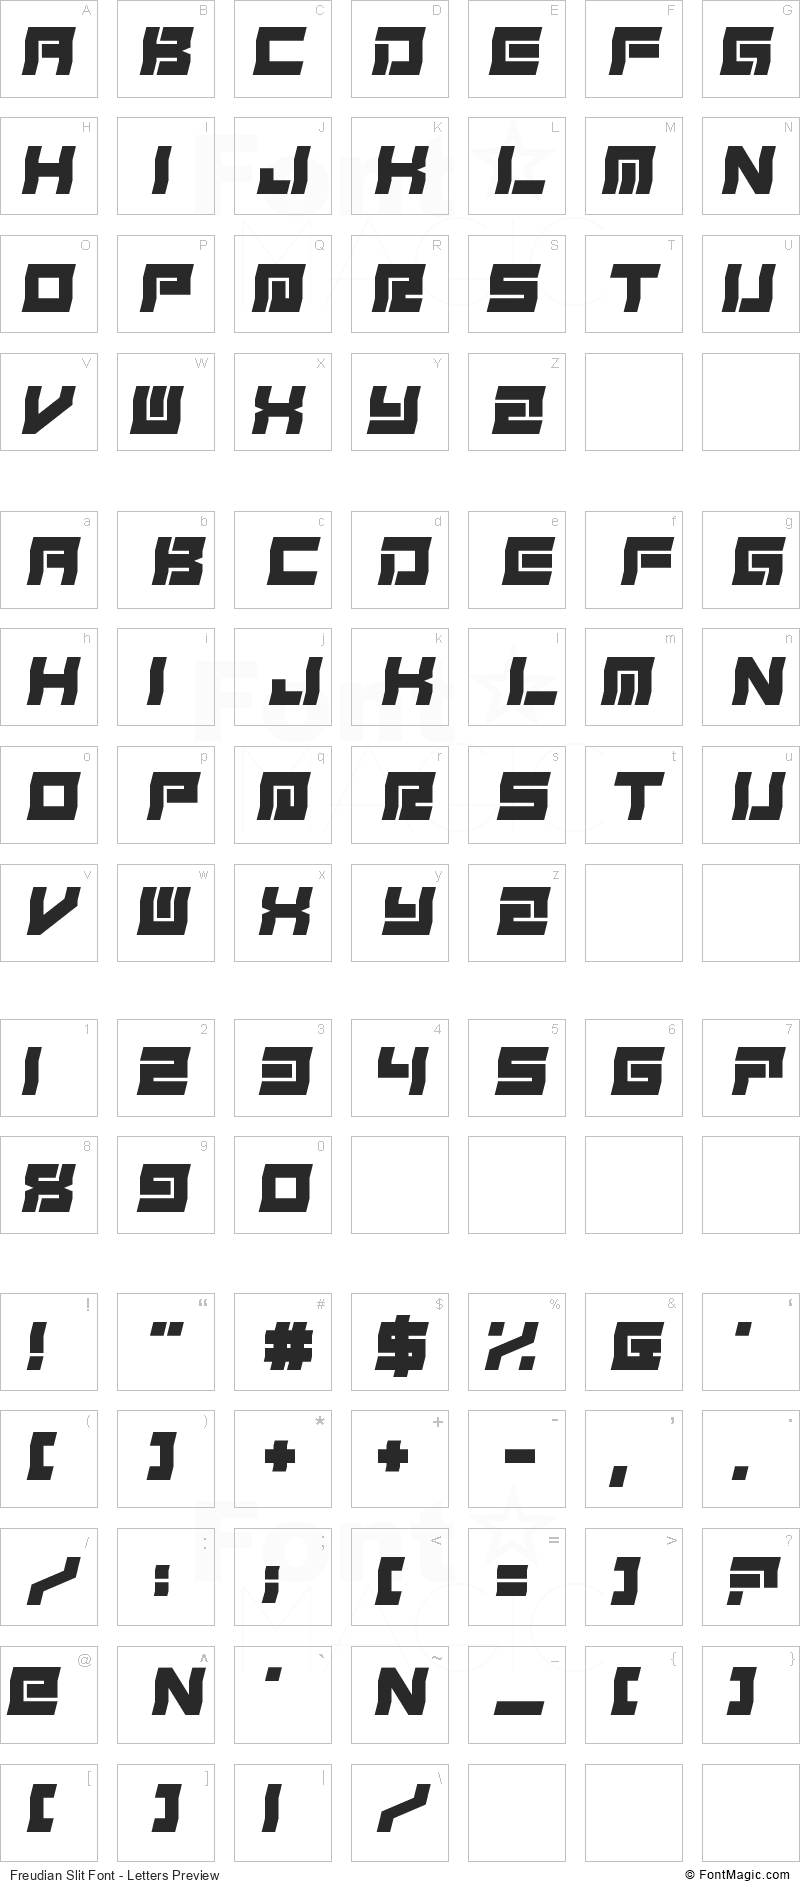 Freudian Slit Font - All Latters Preview Chart